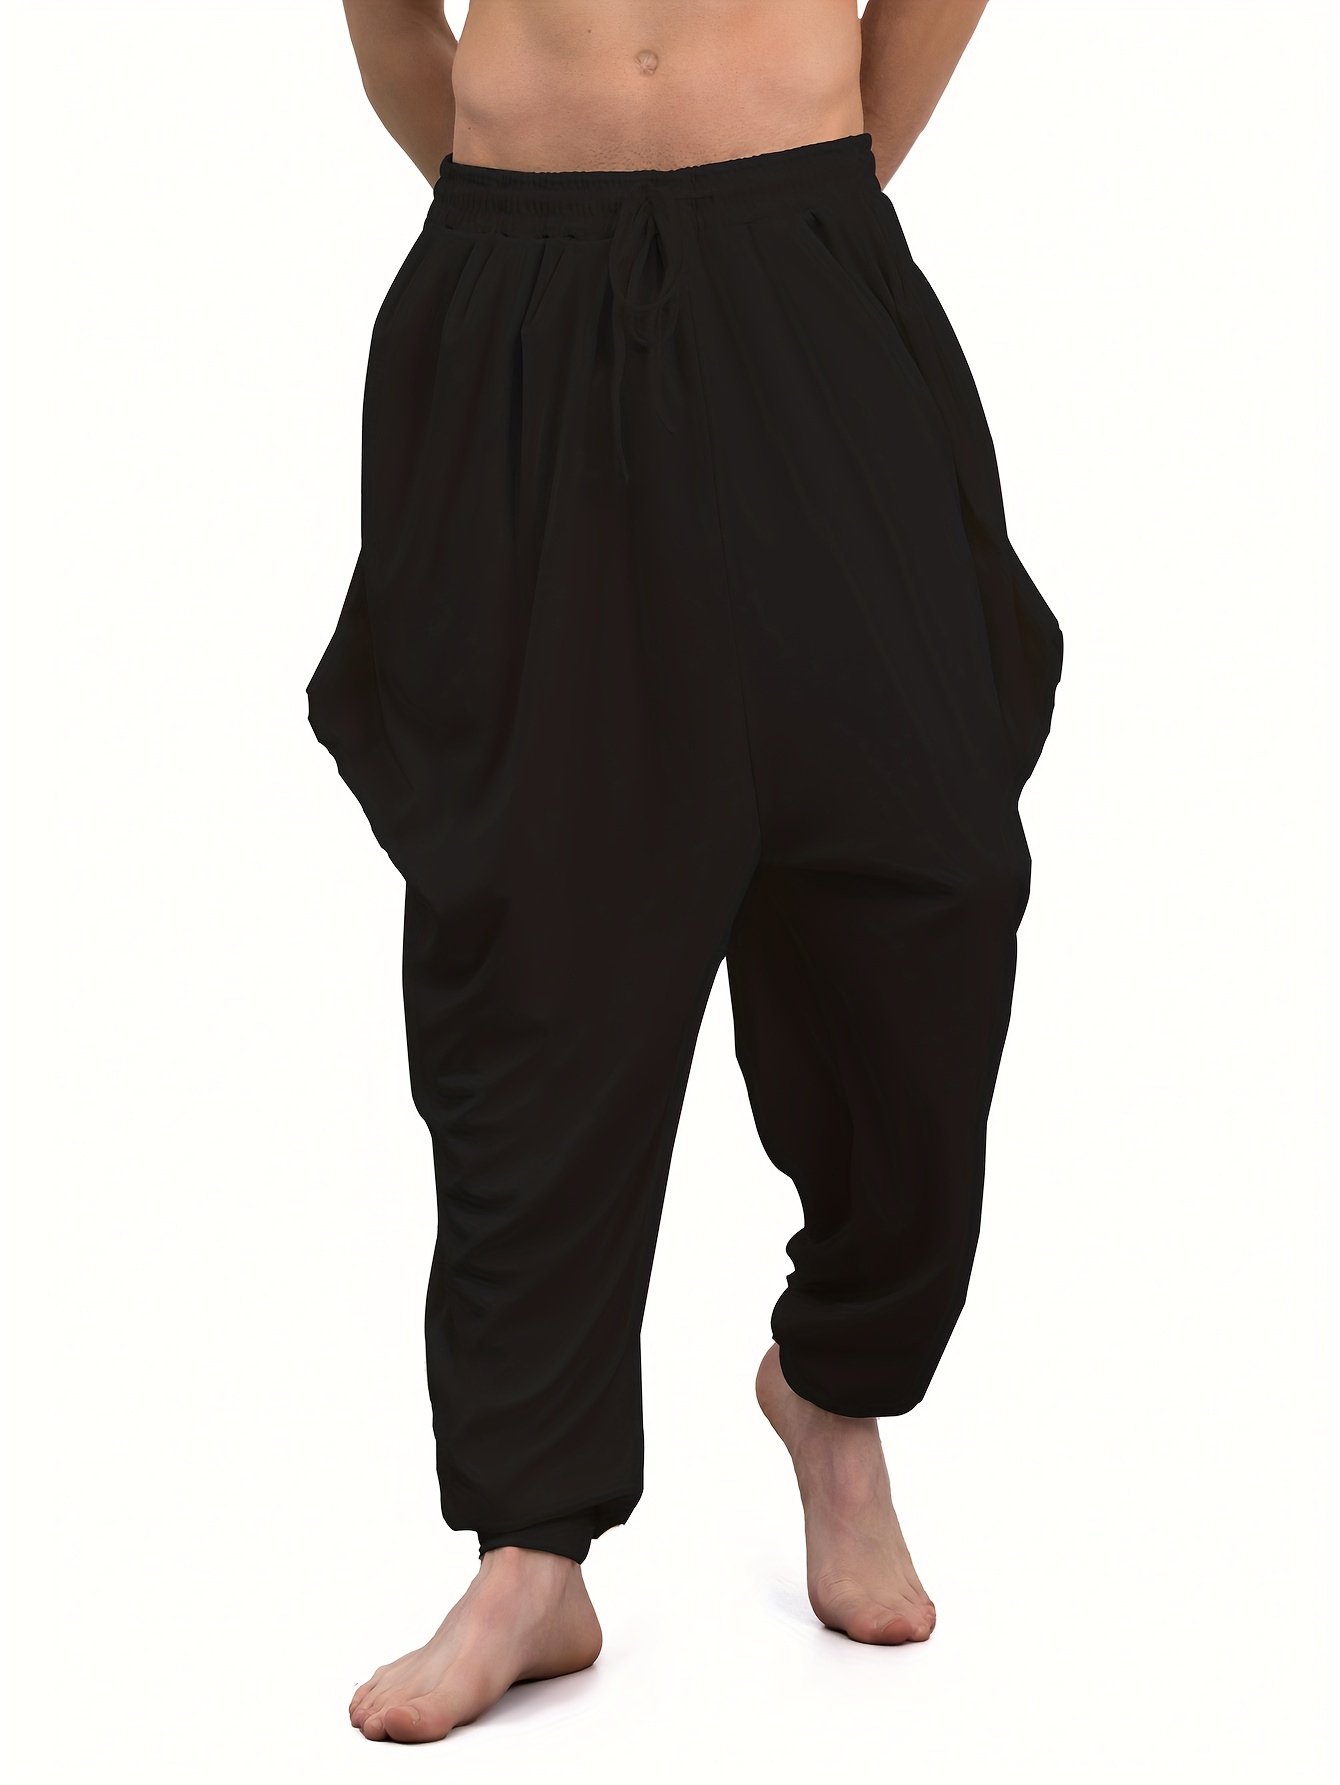 Baggy Pants With Relaxed Fit, Lounge Pants, Plus Size Clothing